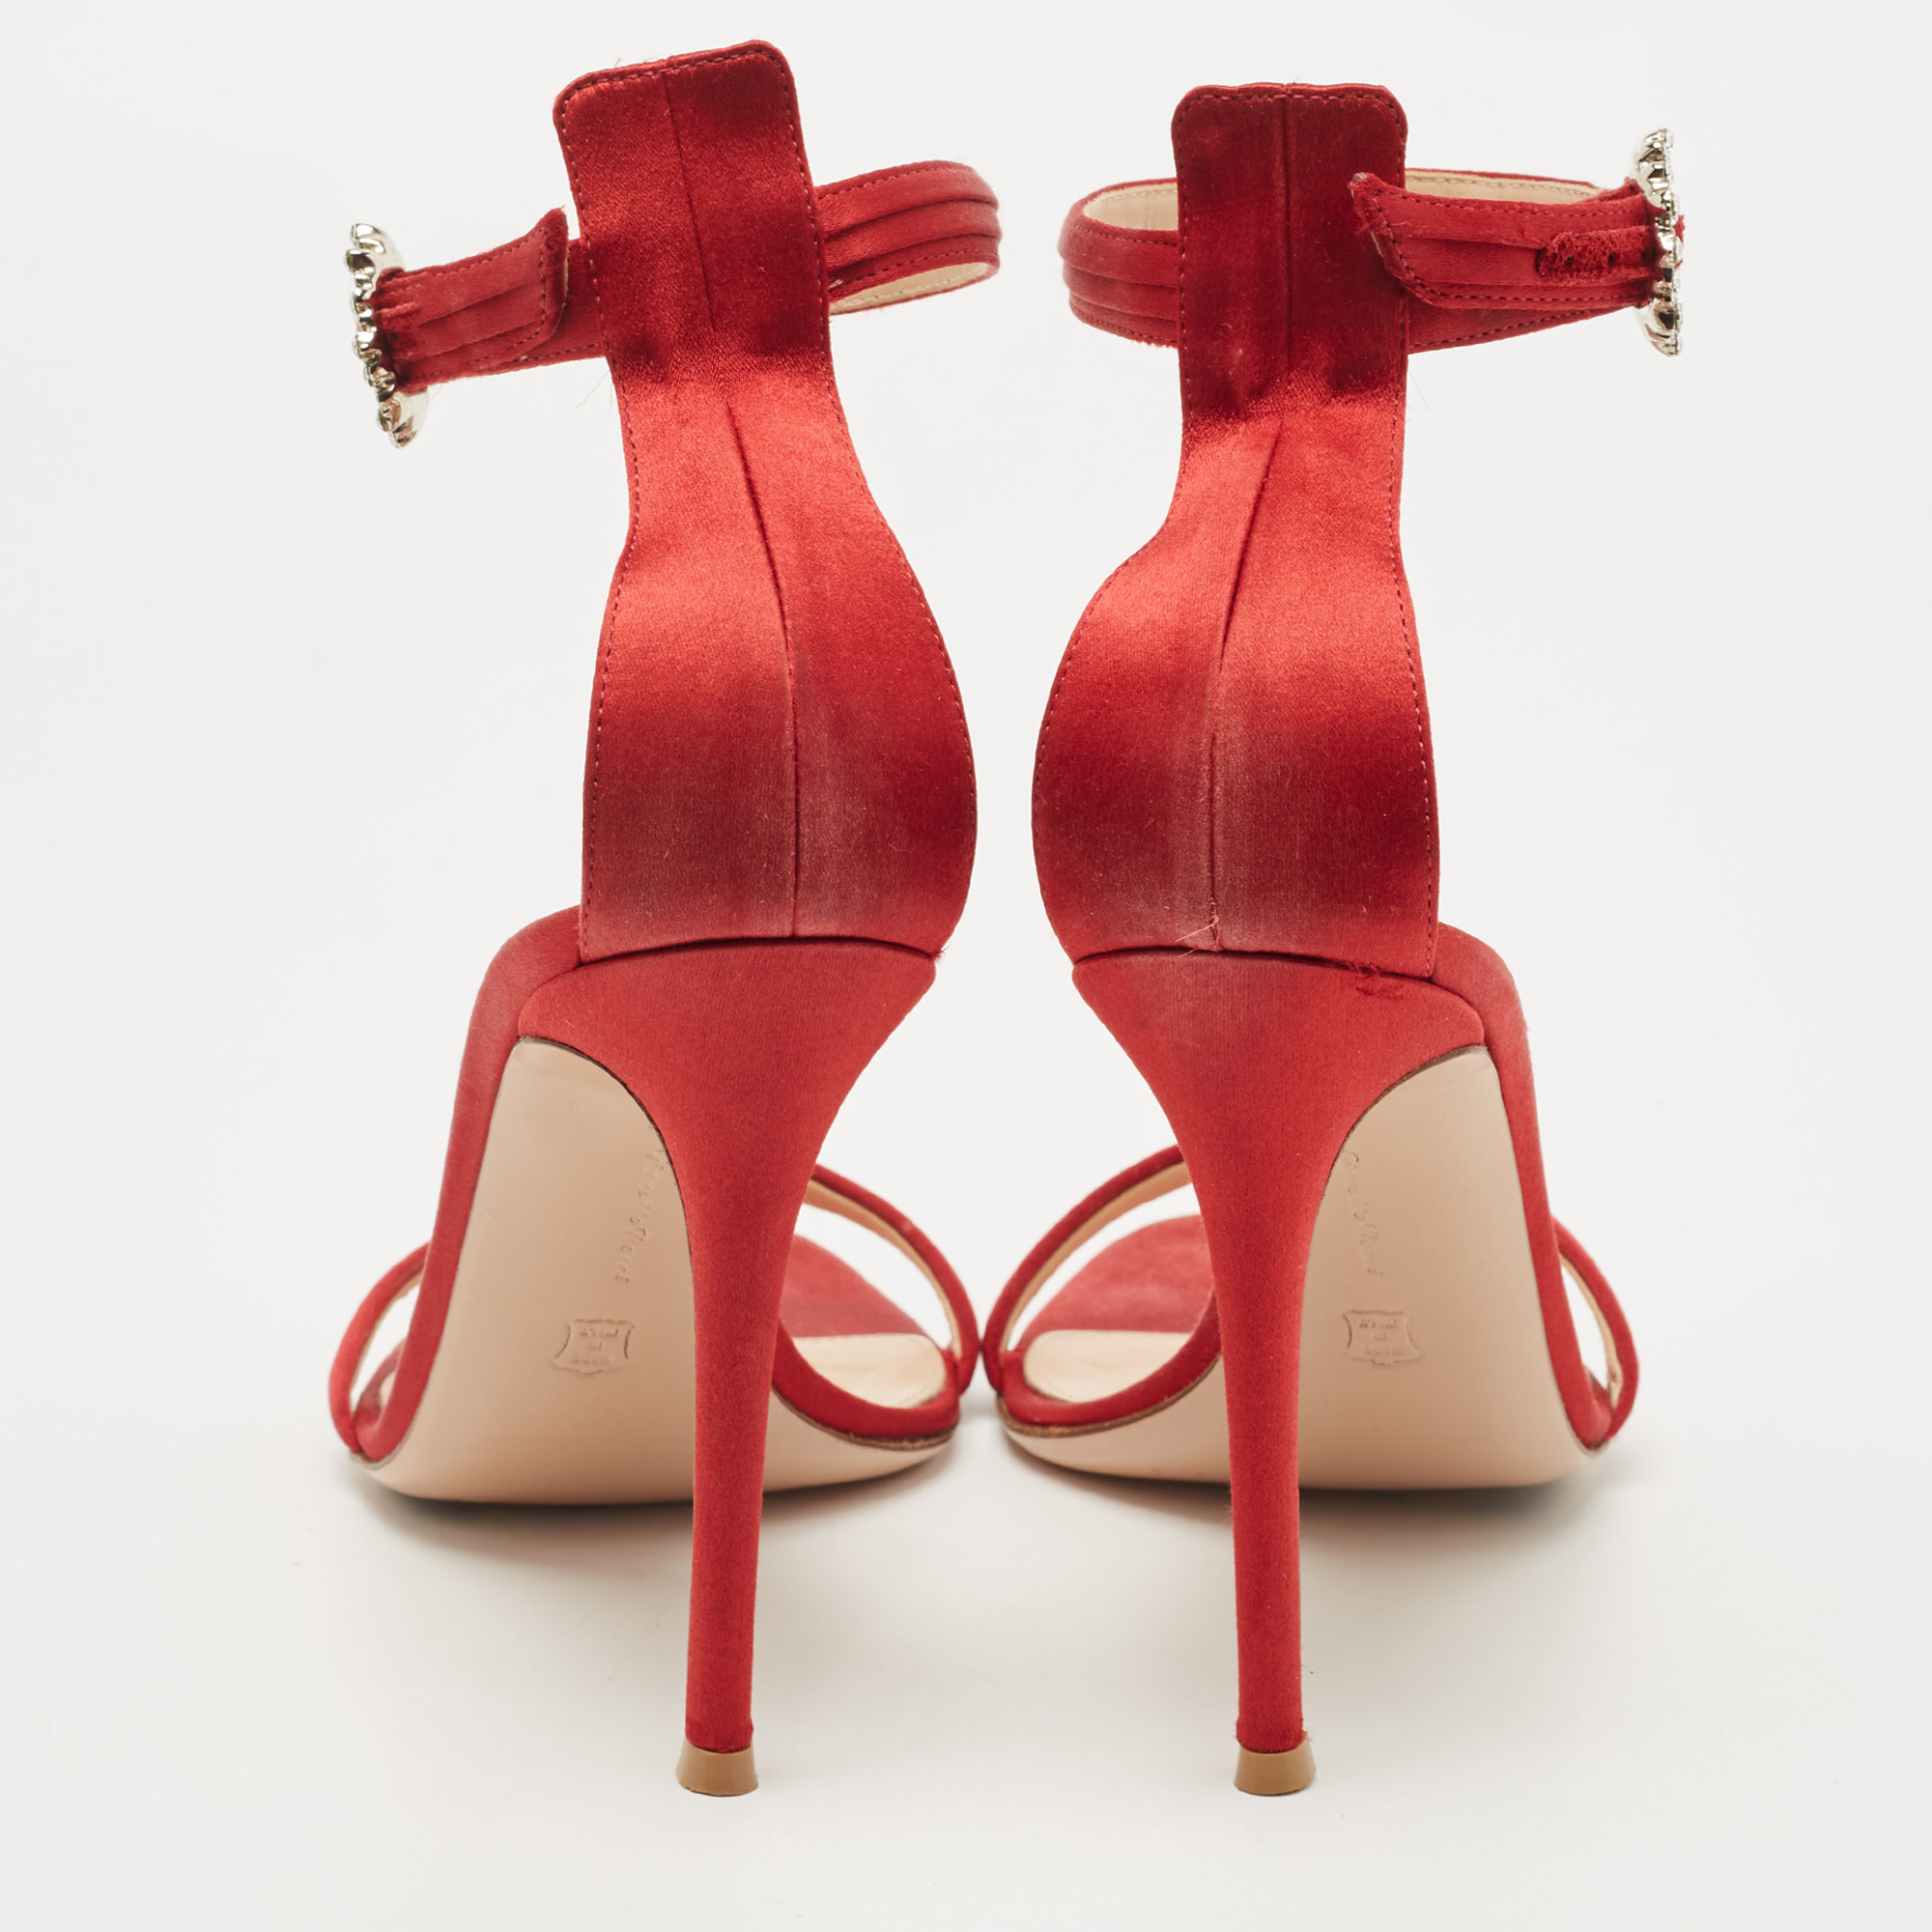 Gianvito Rossi Red Satin Ankle Strap Sandals Size 40